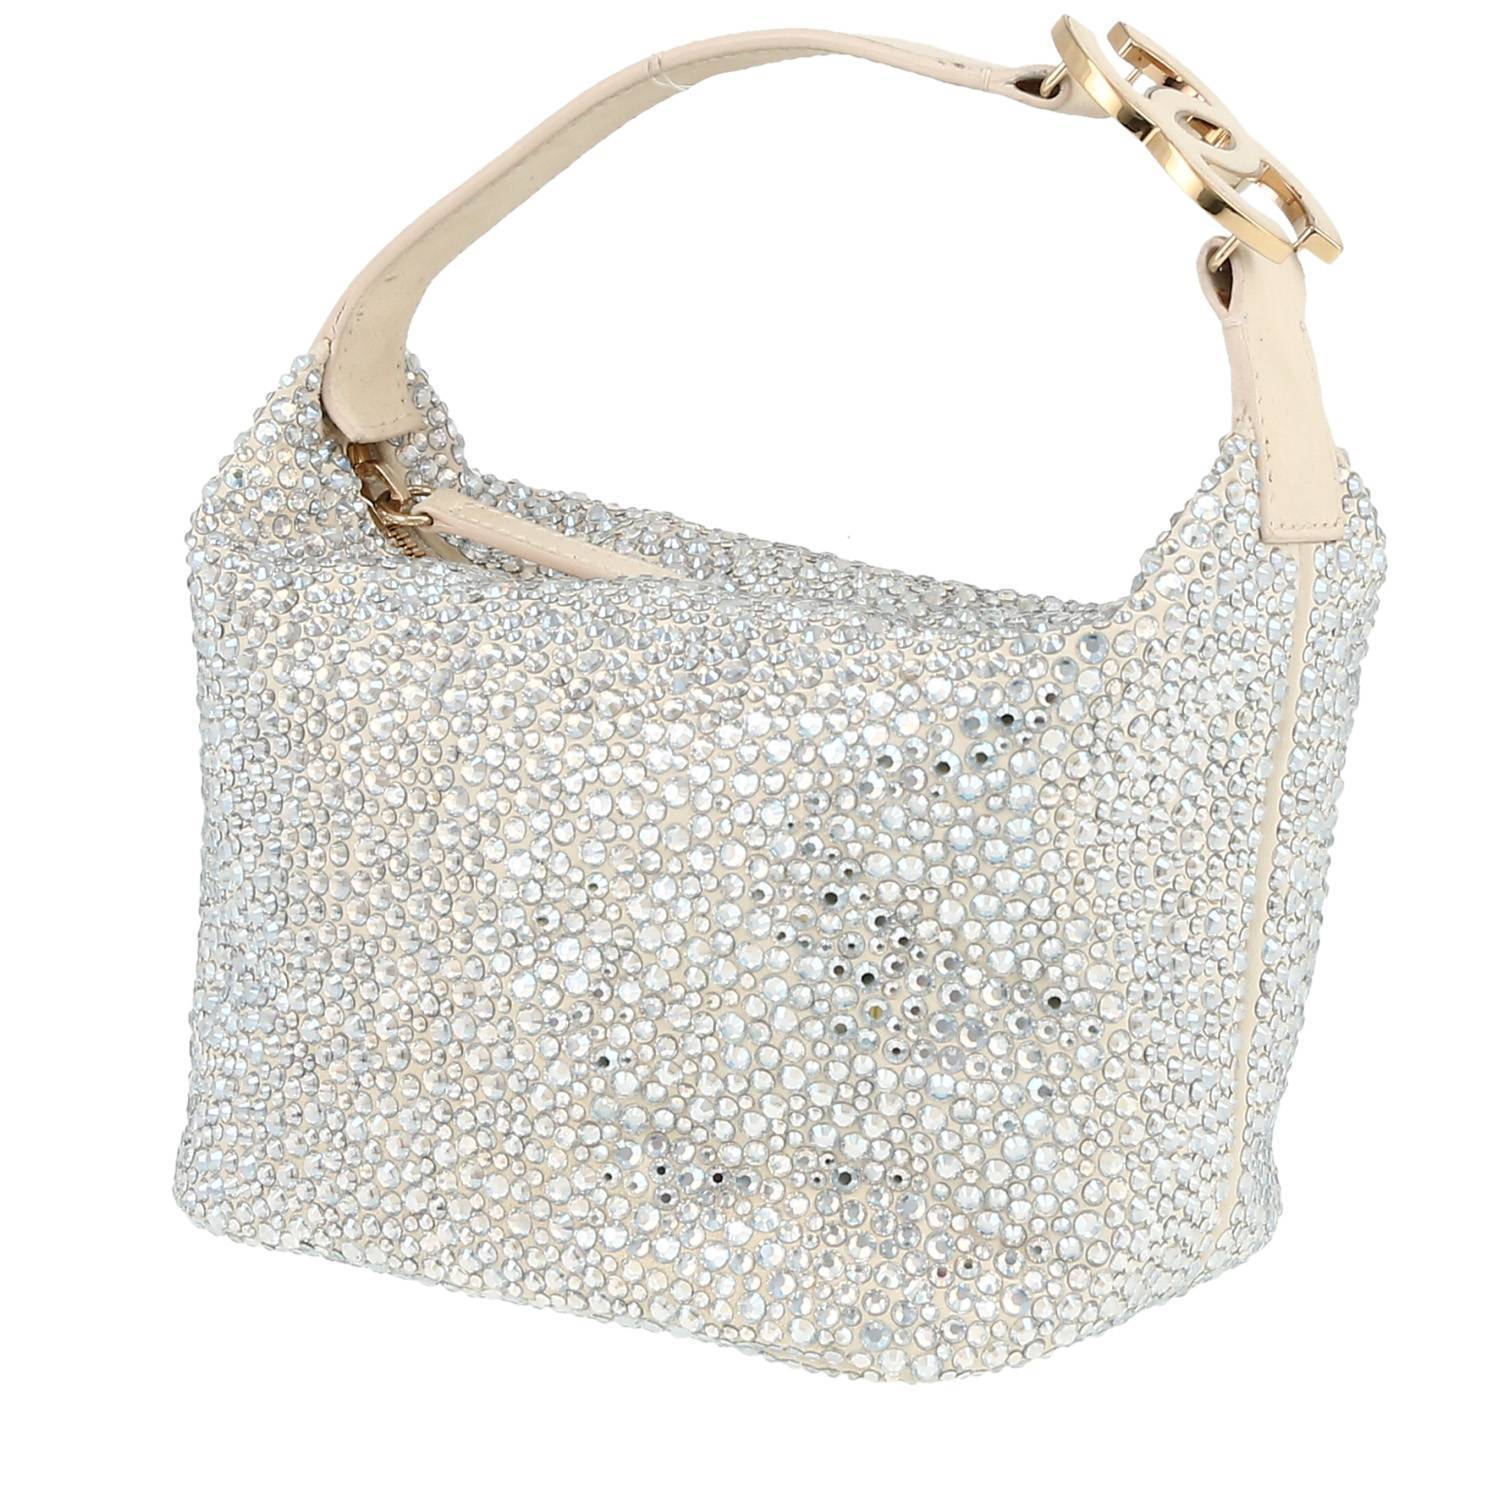 Handbag In Strass And Canvas